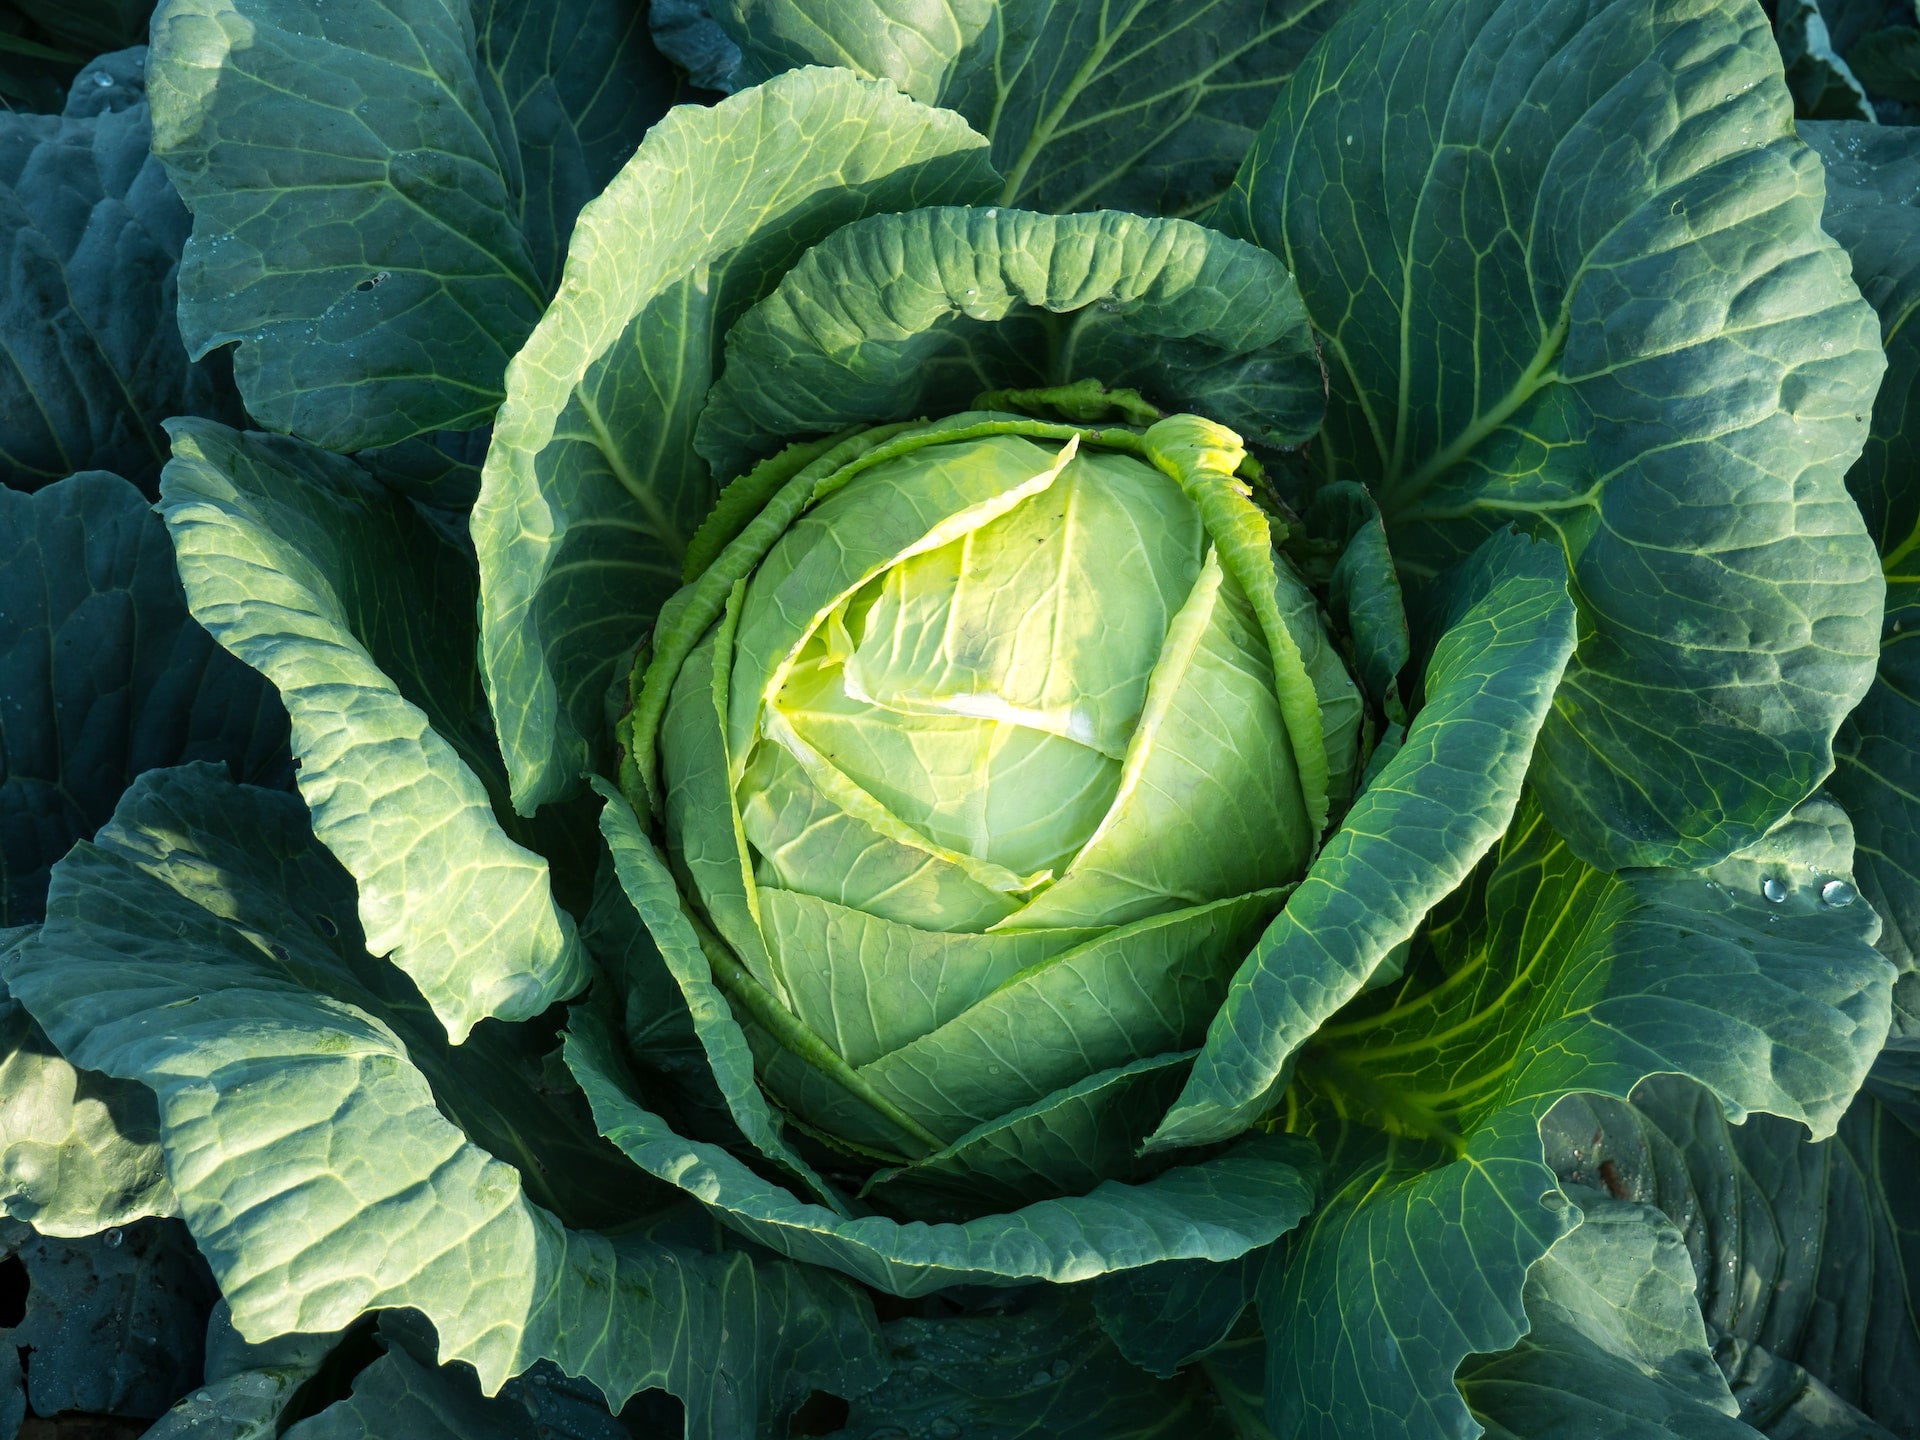 On display is a head of cabbage, of the variety Brunswick, still in the field awaiting harvest. We are zoomed in and can view this single head of cabbage. The sun is starting descend in the lower right of the image, casting shadows among the cabbage leaves.